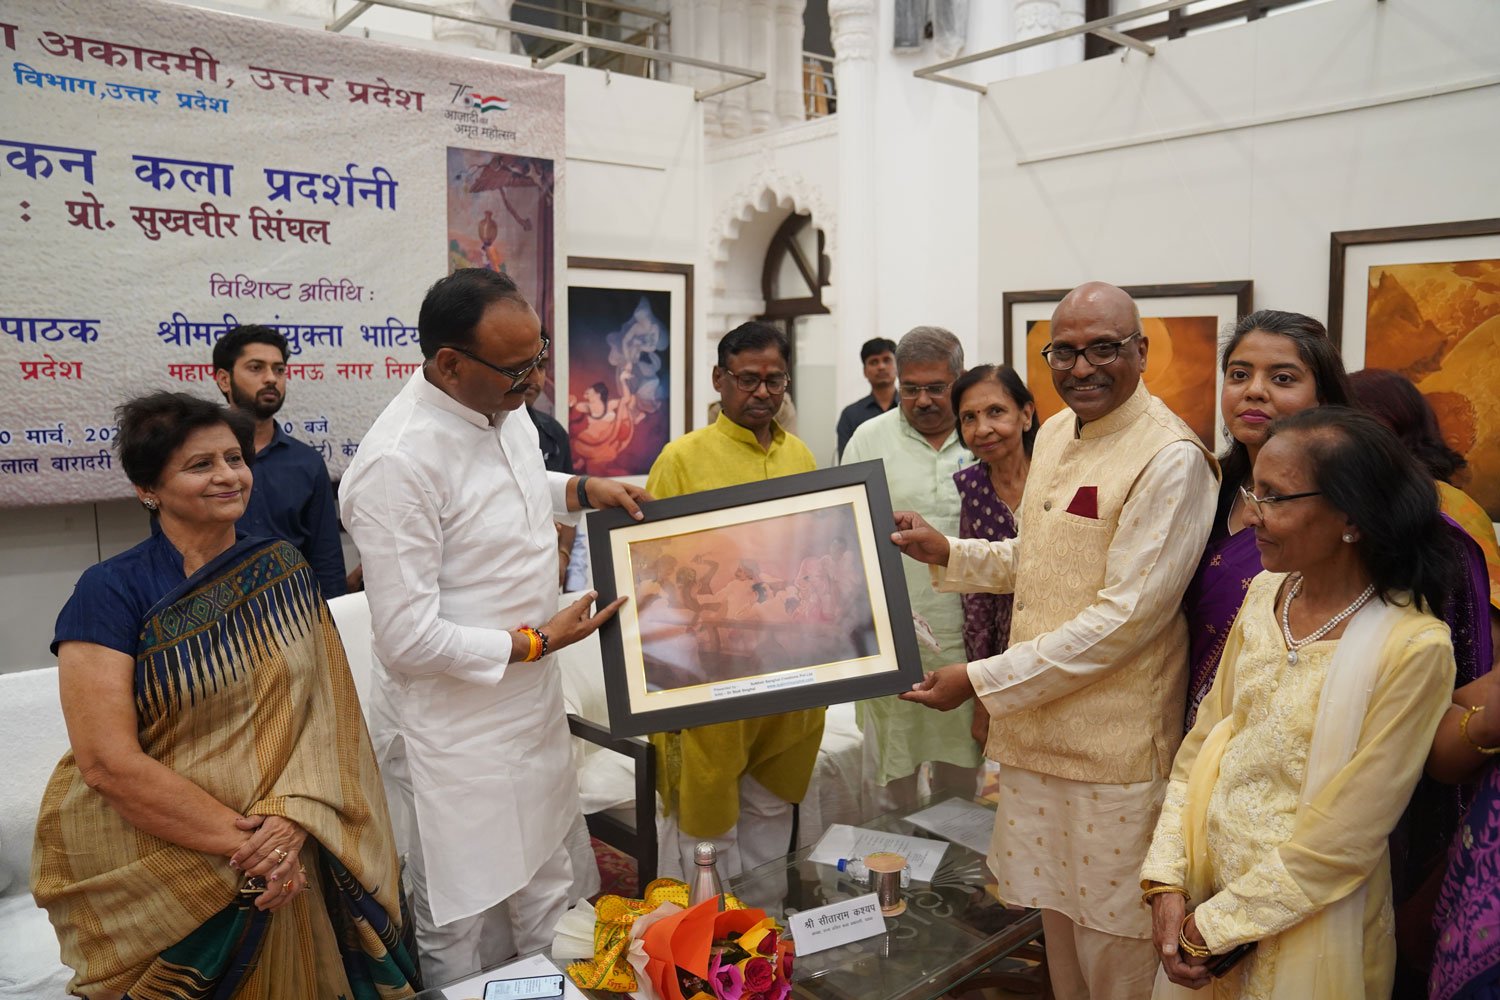 art exhibitions organized as a tribute to the wash painting legend prof. sukhvir sanghal